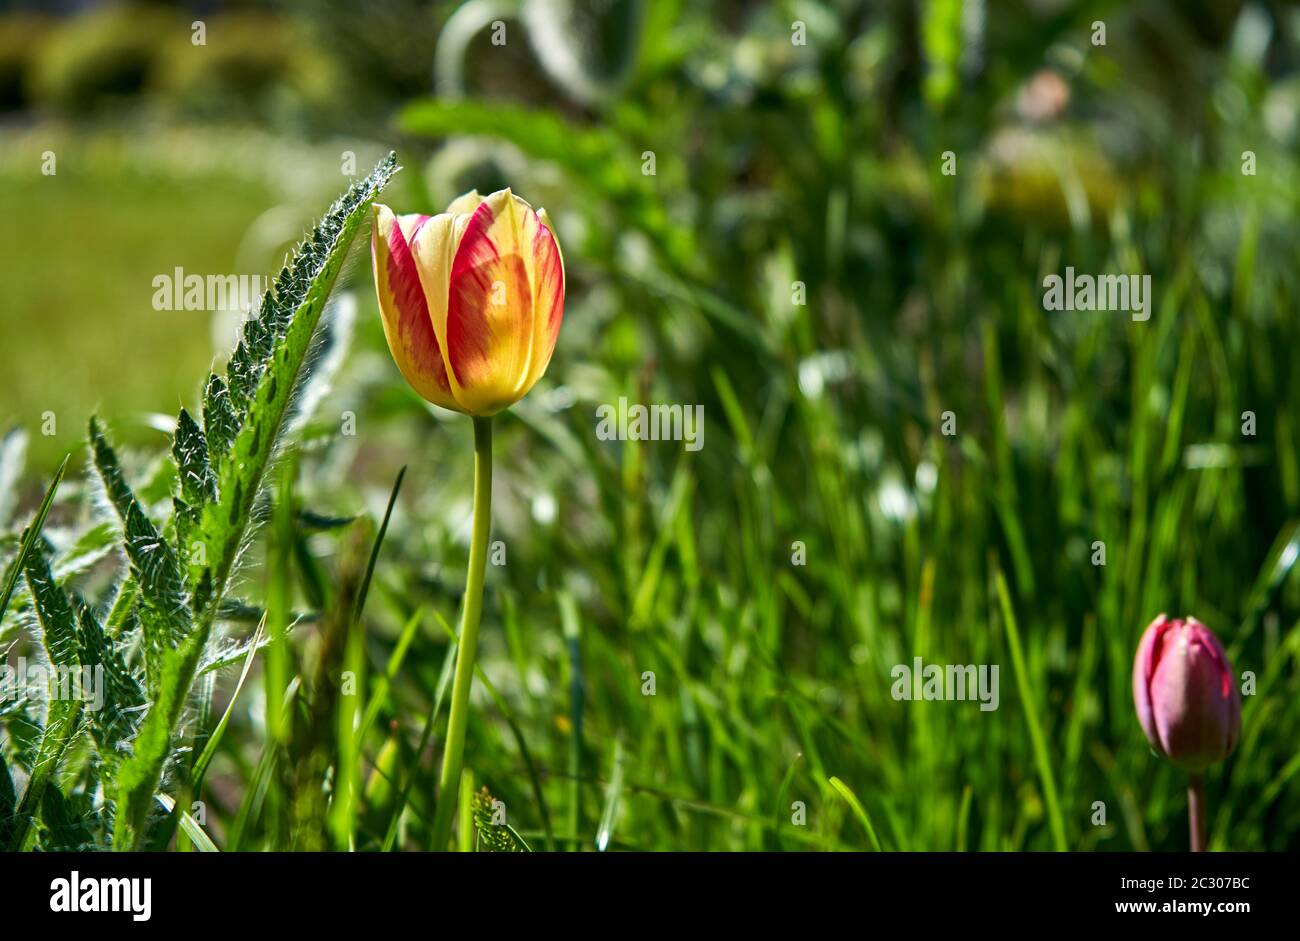 Red and yellow tulip flower Stock Photo